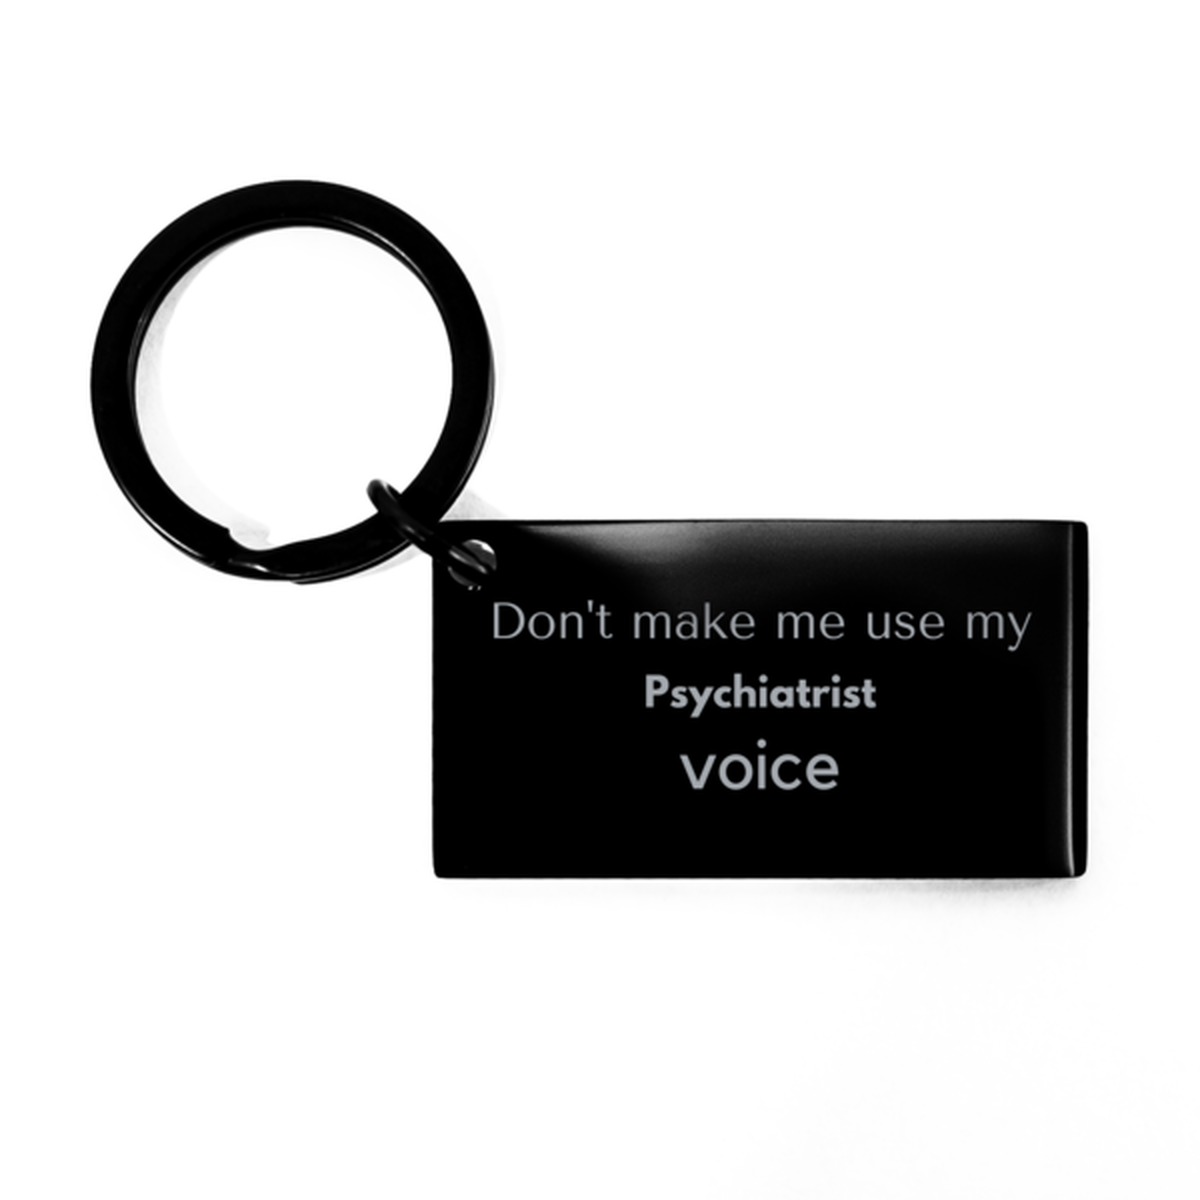 Don't make me use my Psychiatrist voice, Sarcasm Psychiatrist Gifts, Christmas Psychiatrist Keychain Birthday Unique Gifts For Psychiatrist Coworkers, Men, Women, Colleague, Friends